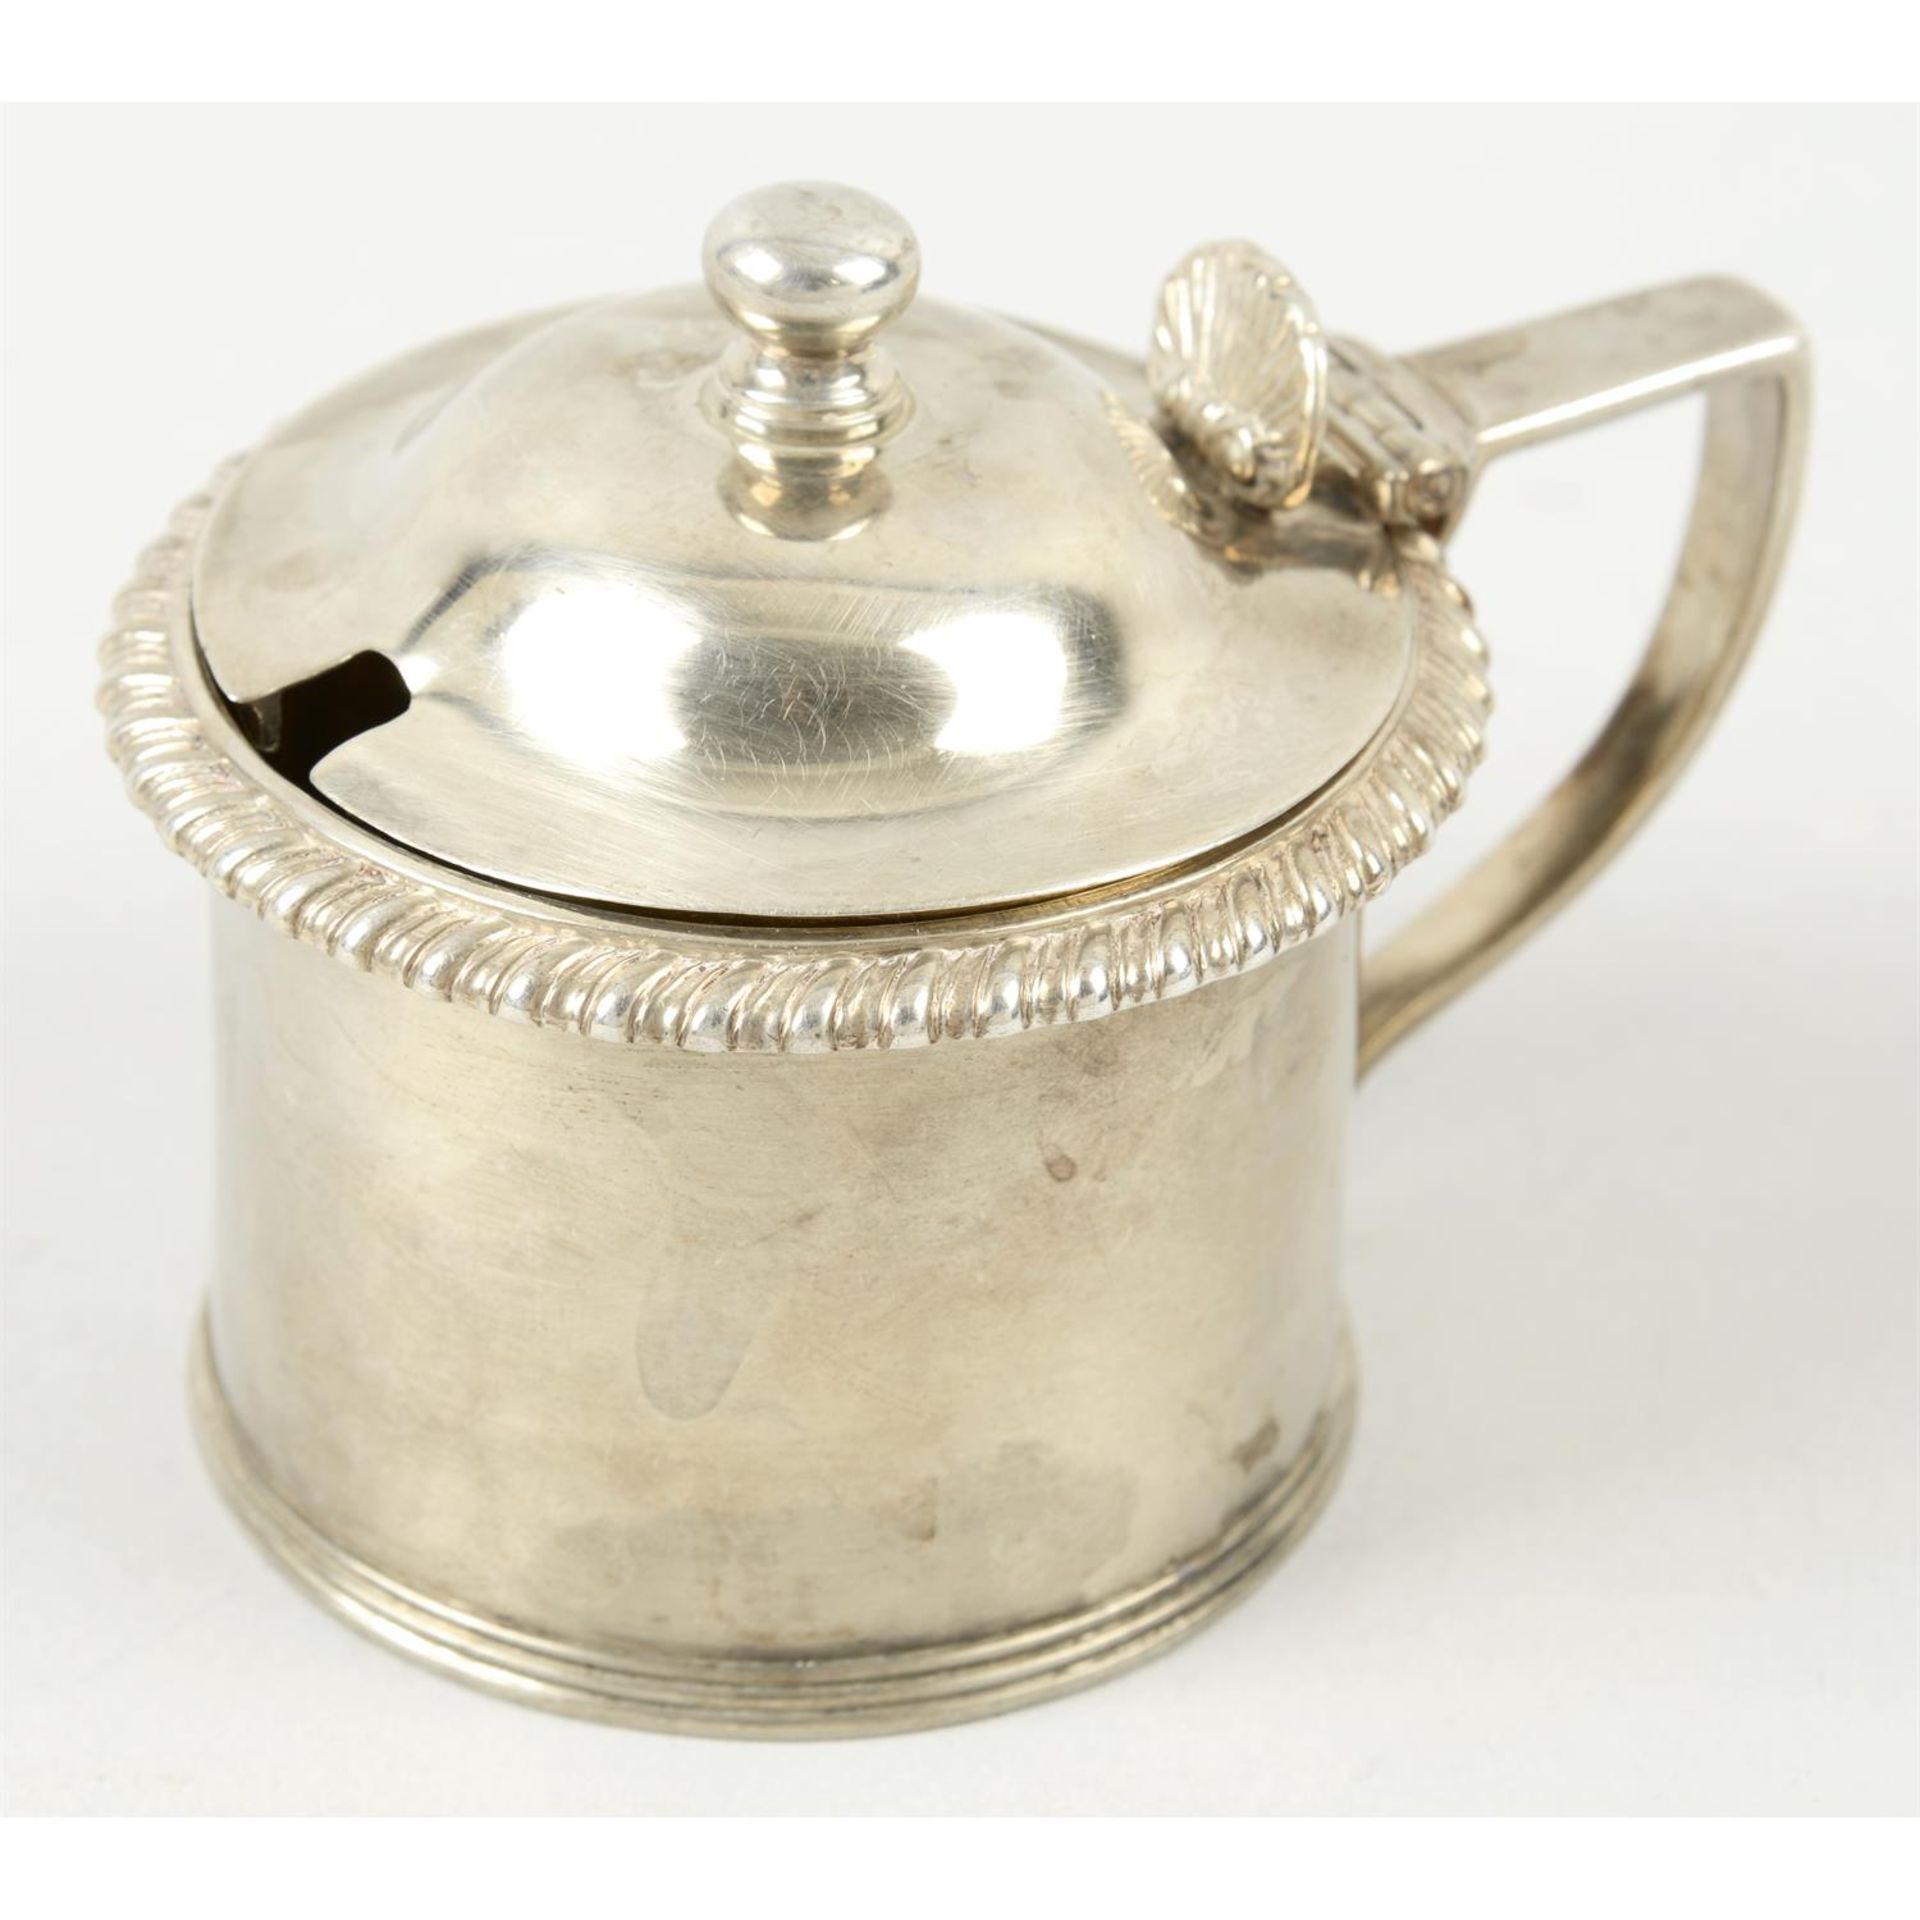 A George IV silver mustard pot; together with four pierced open salts (all missing glass liners).